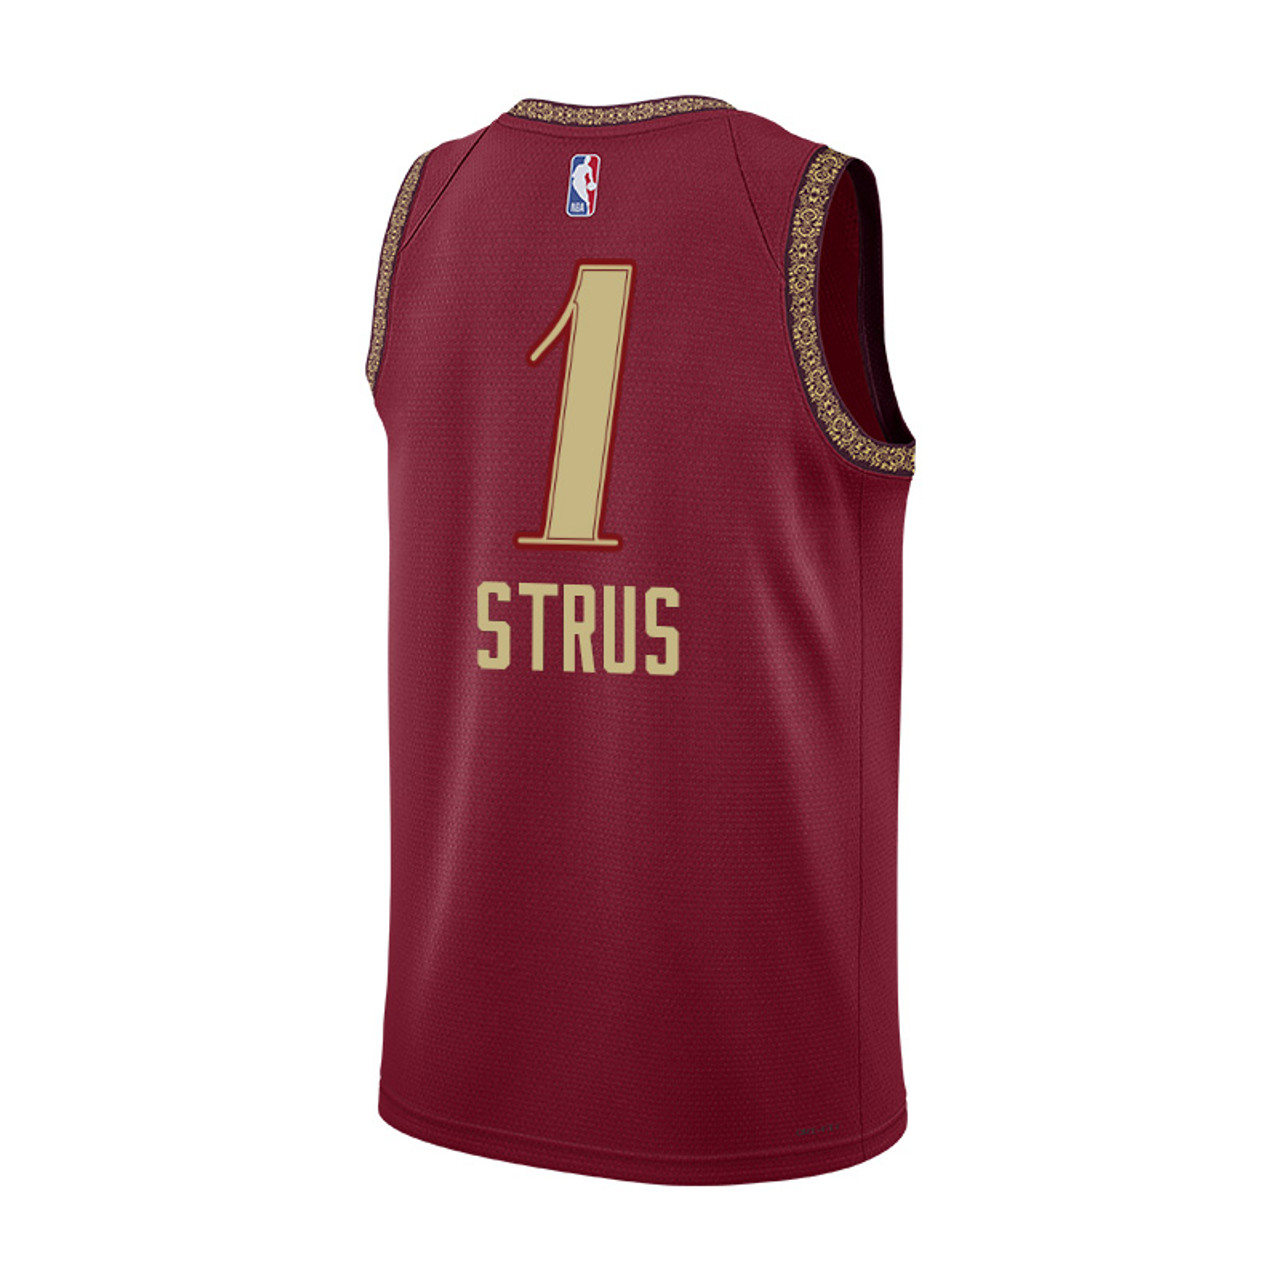 Marquee City Edition Jerseys  Center Court, the official Cavs